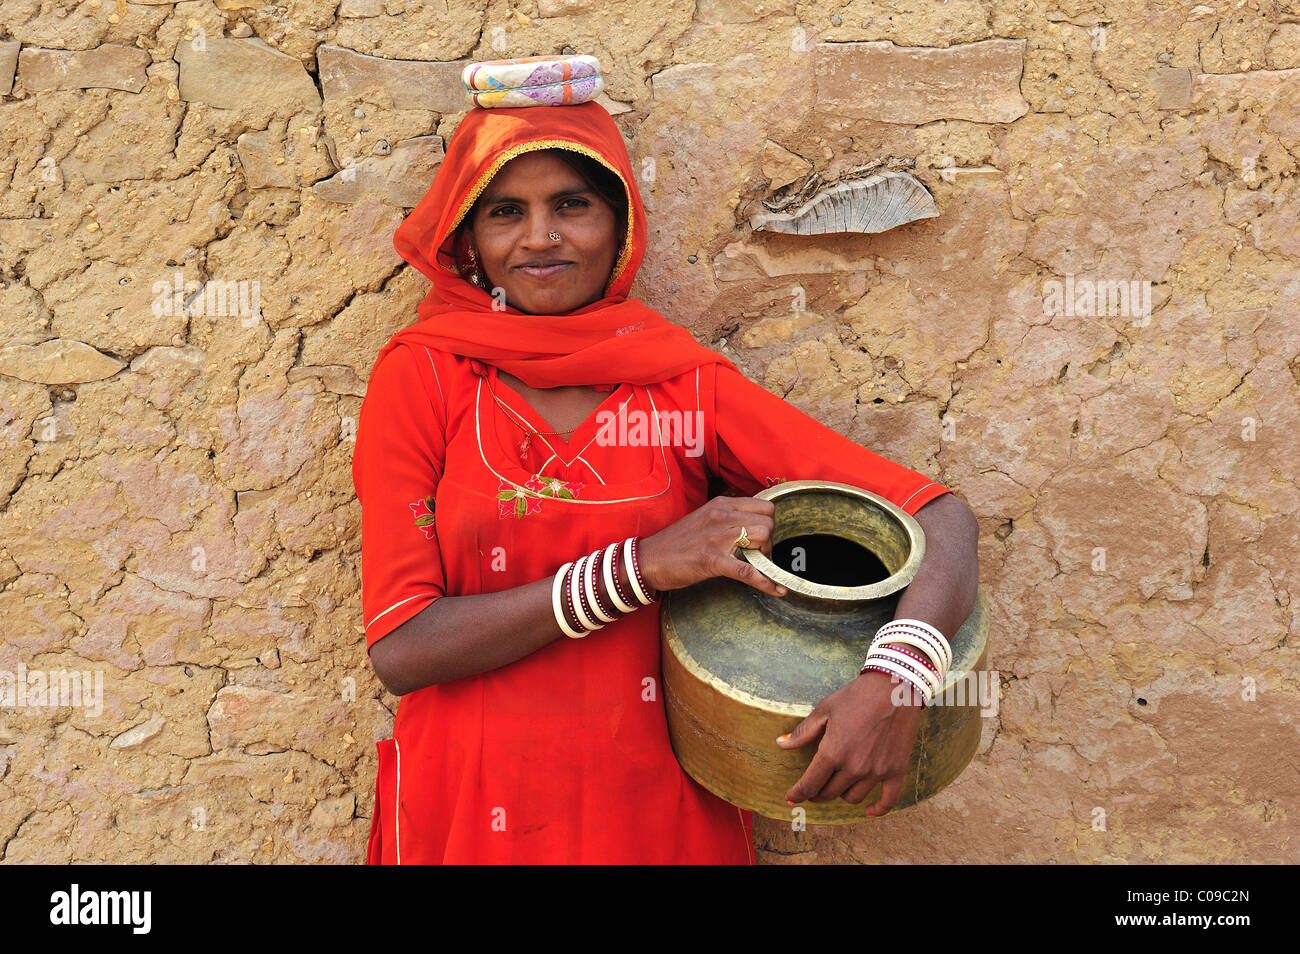 Young woman in a sari with water jug, Thar Desert, Rajasthan, India, Asia Stock Photo